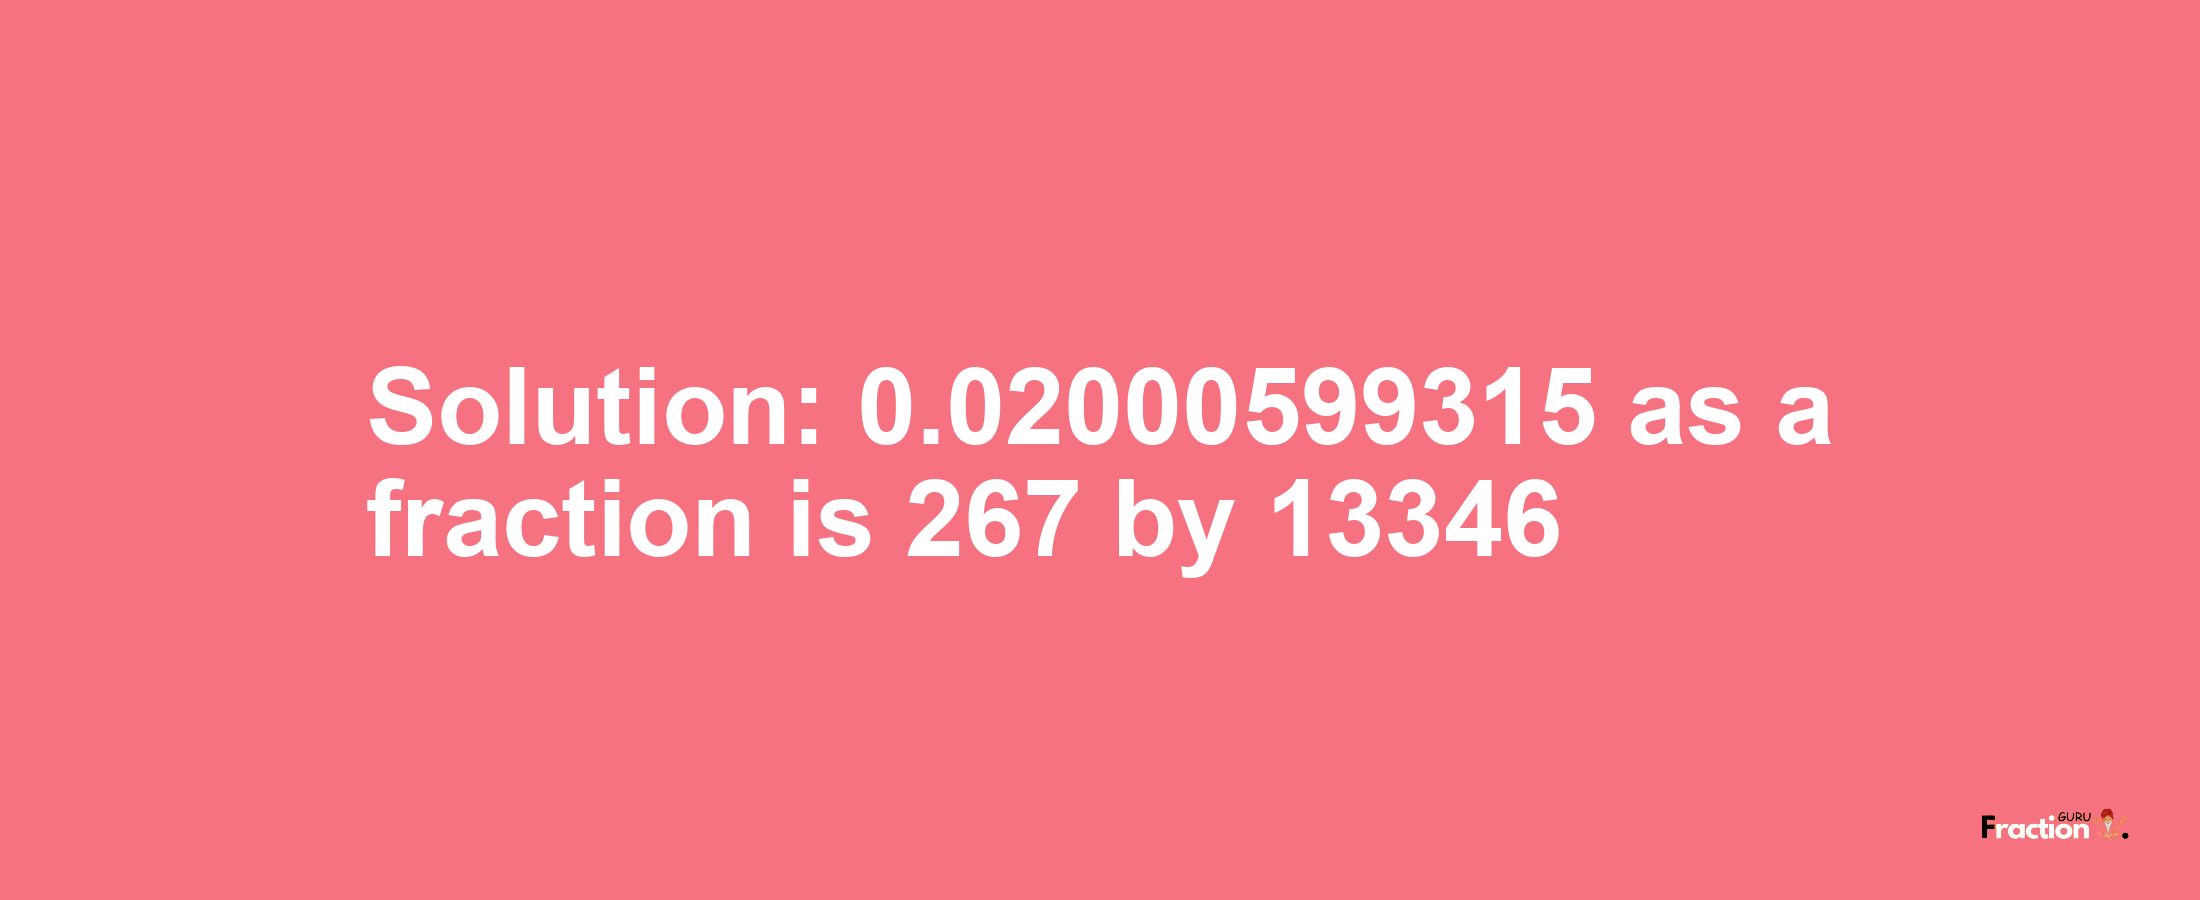 Solution:0.02000599315 as a fraction is 267/13346